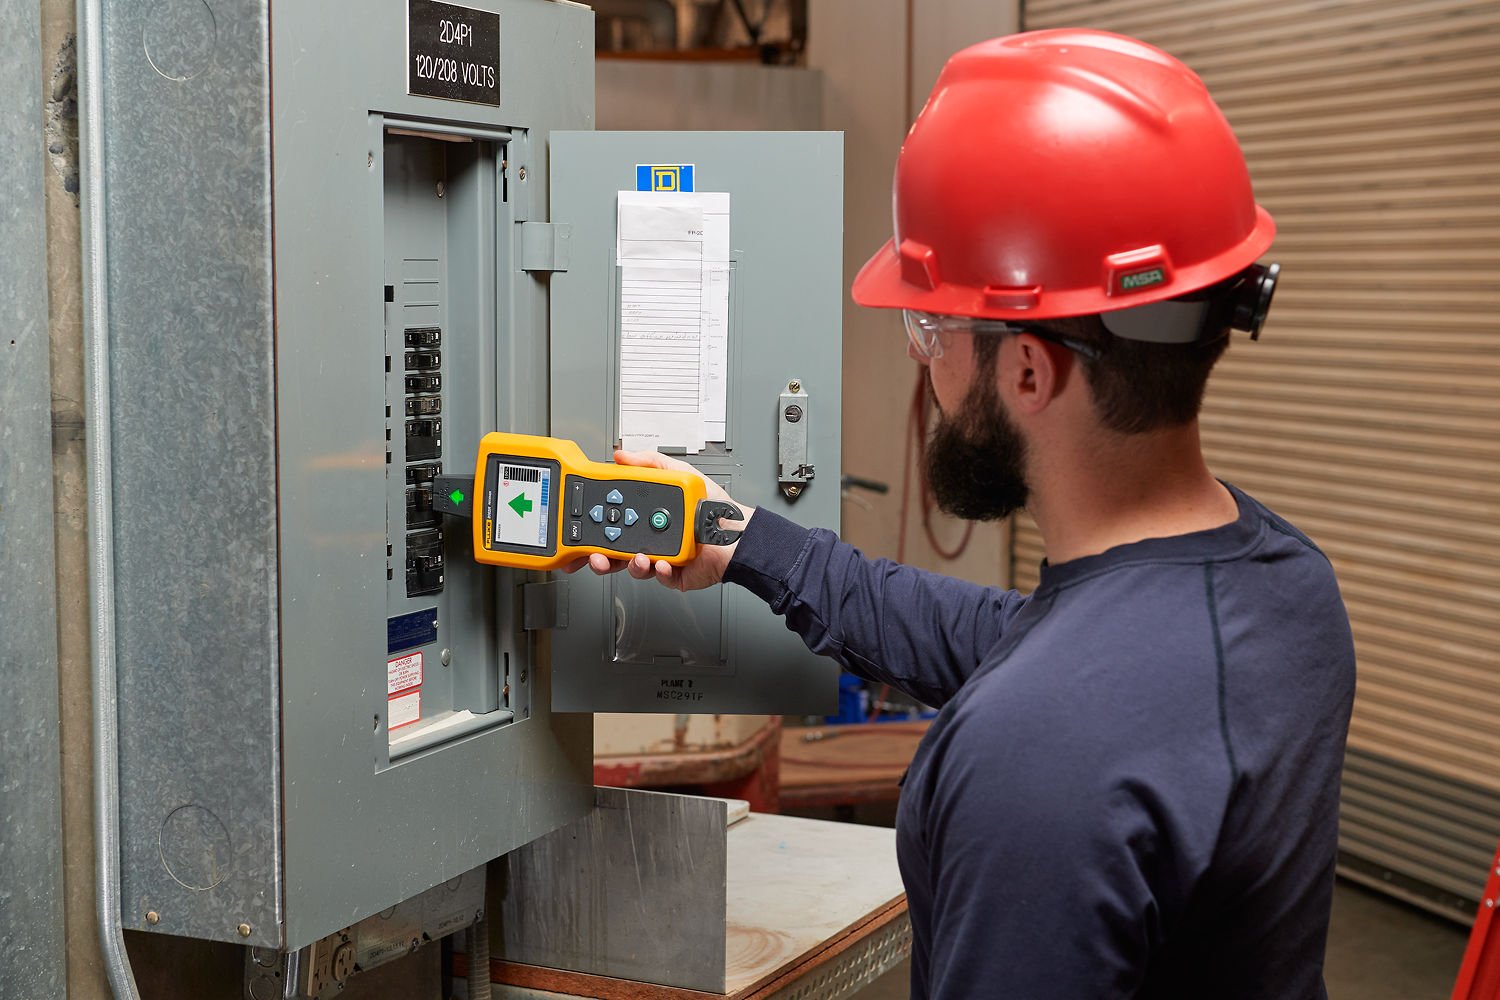 Man wearing a red hard hat uses a wire tracer to take a measurement in a breaker box